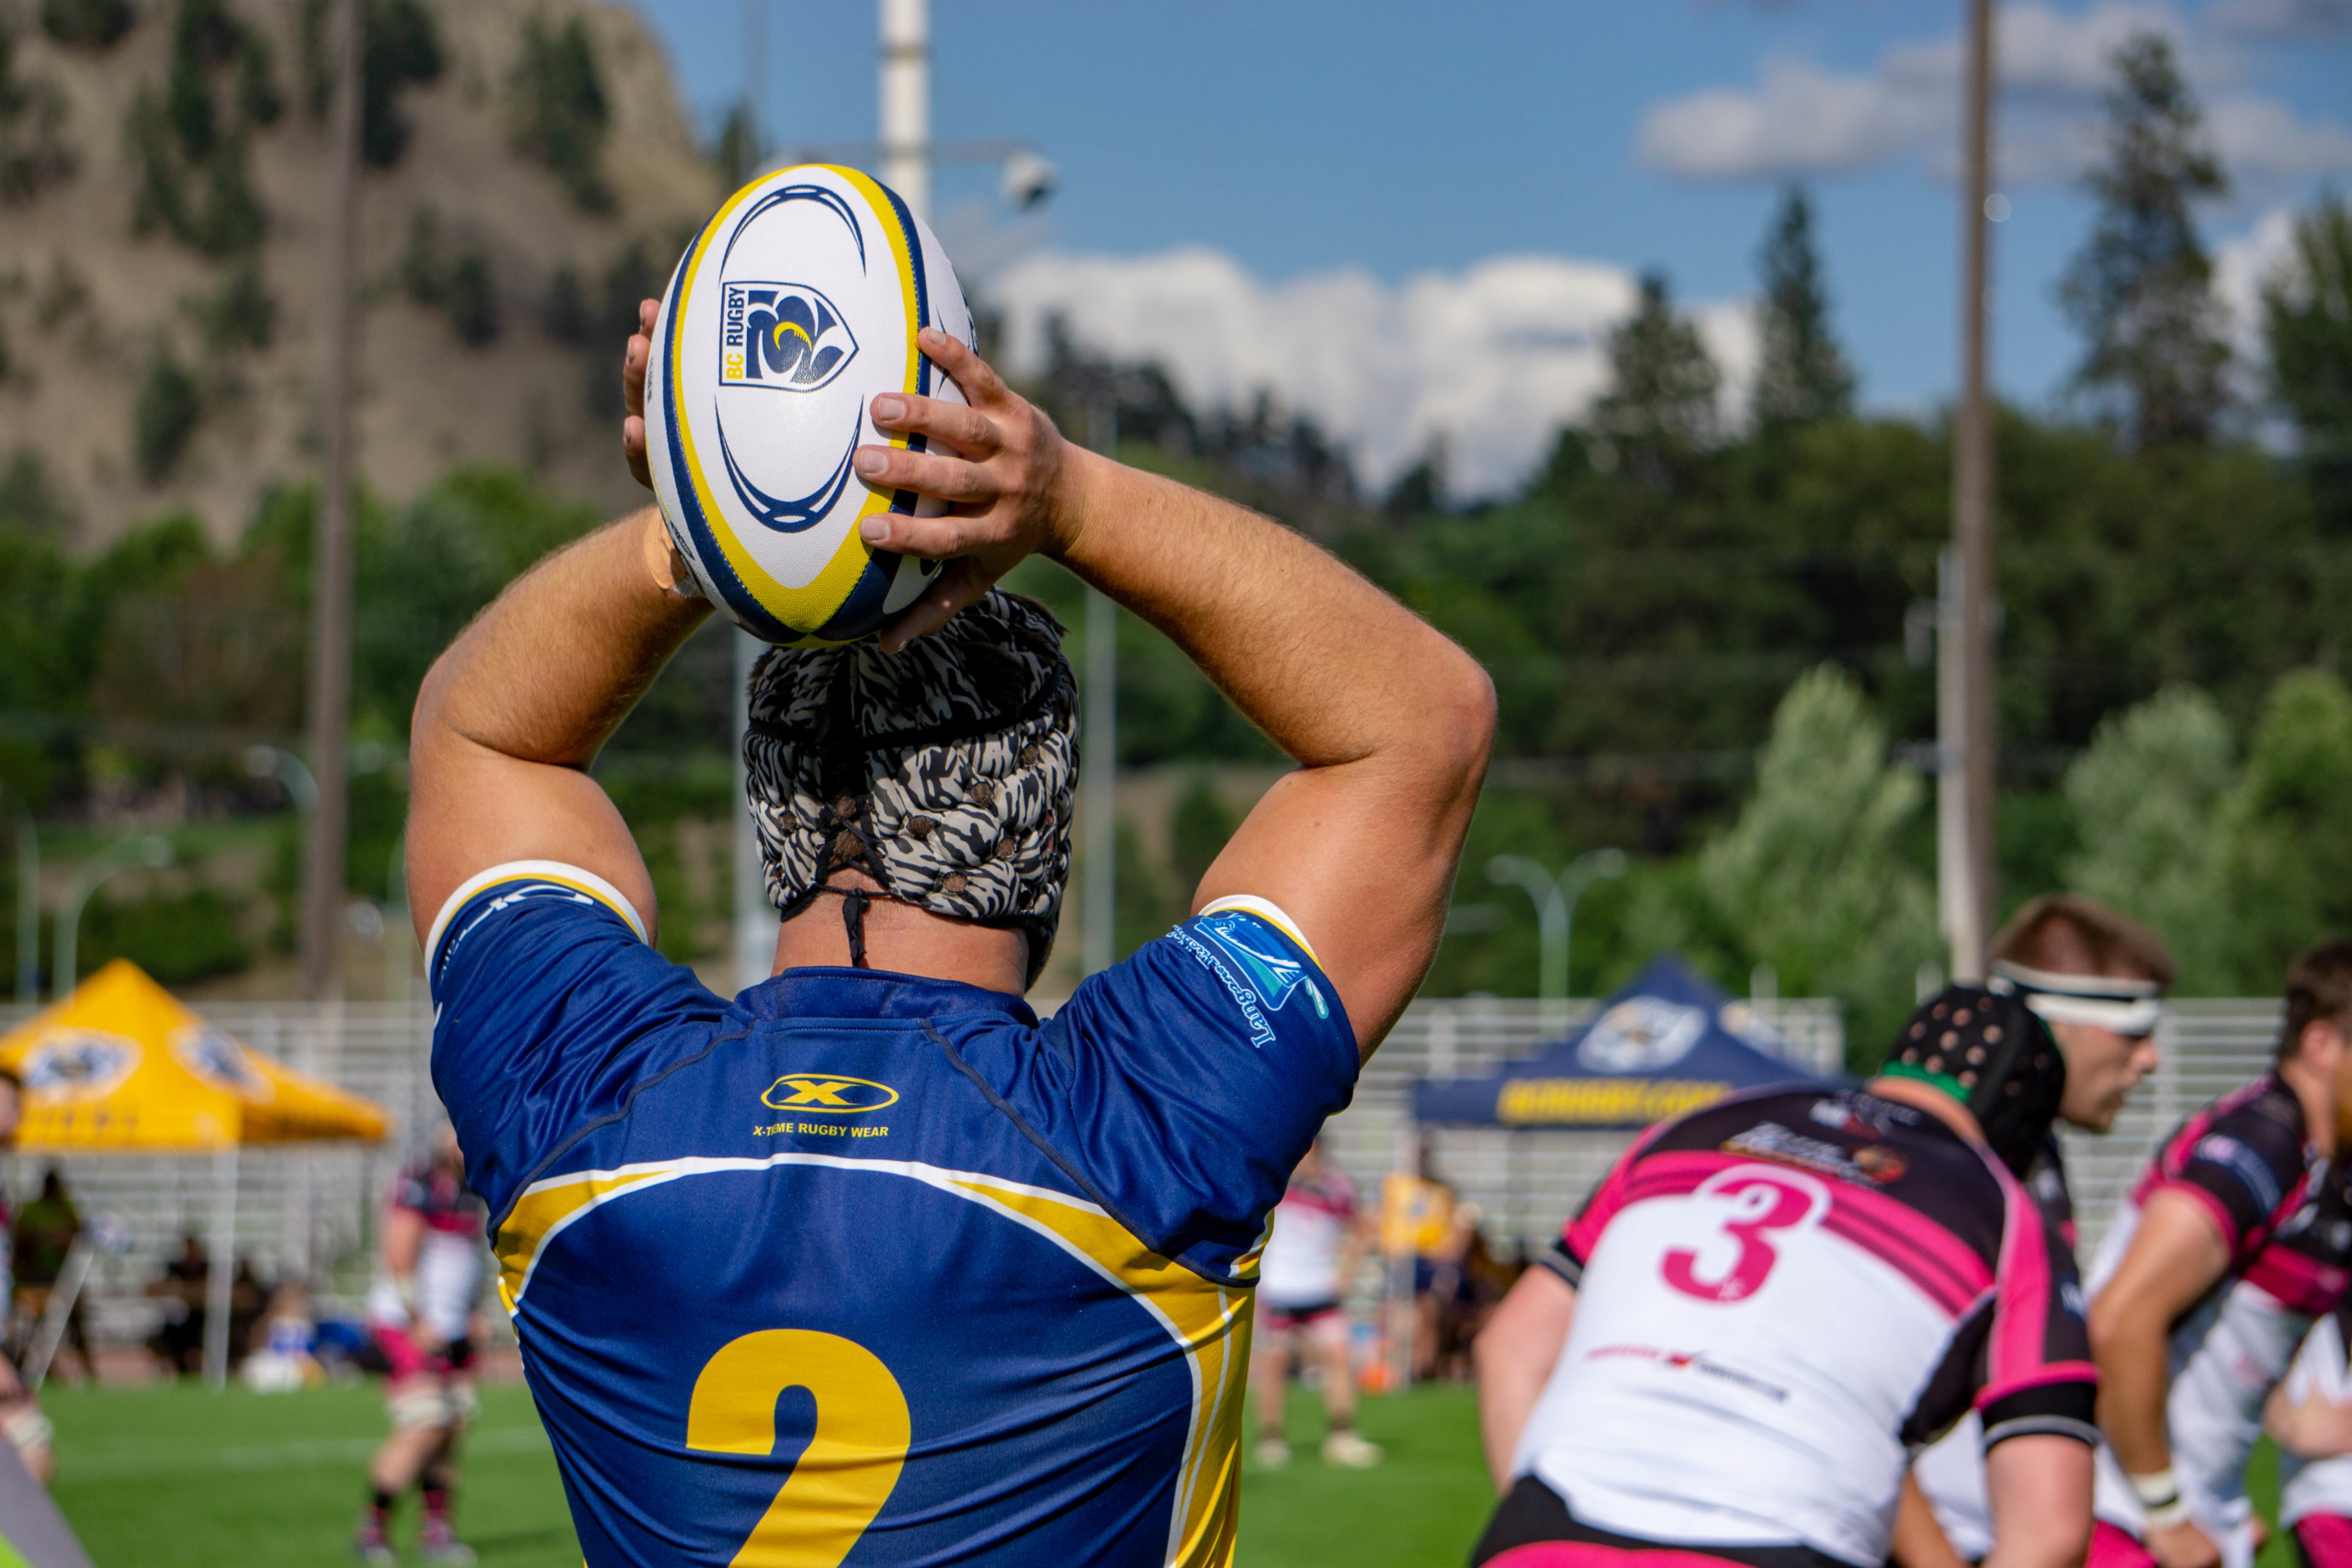 A BC Bears Senior Men's Player gets ready to throw a lineout